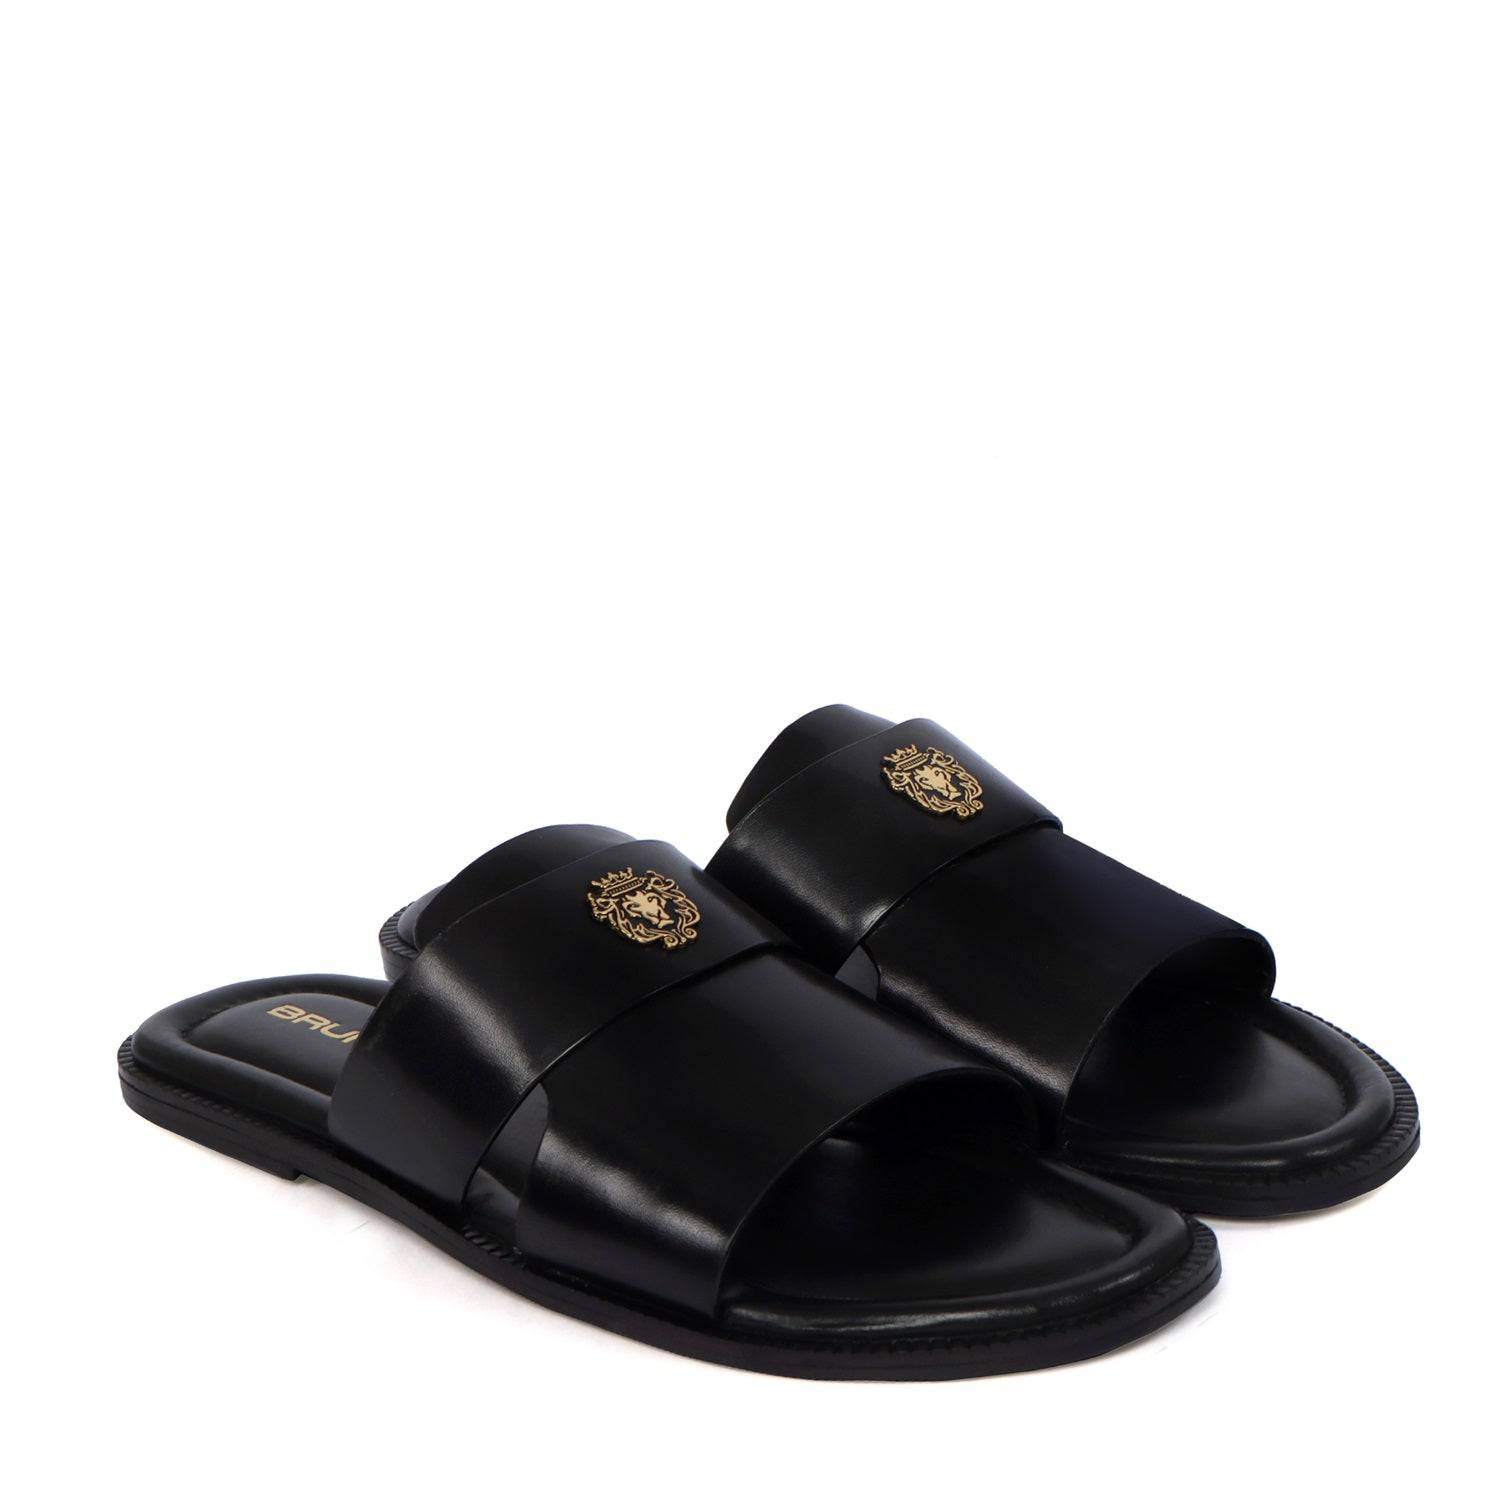 Welt Slippers with Broad Strapped Cut Out Detail Black Leather